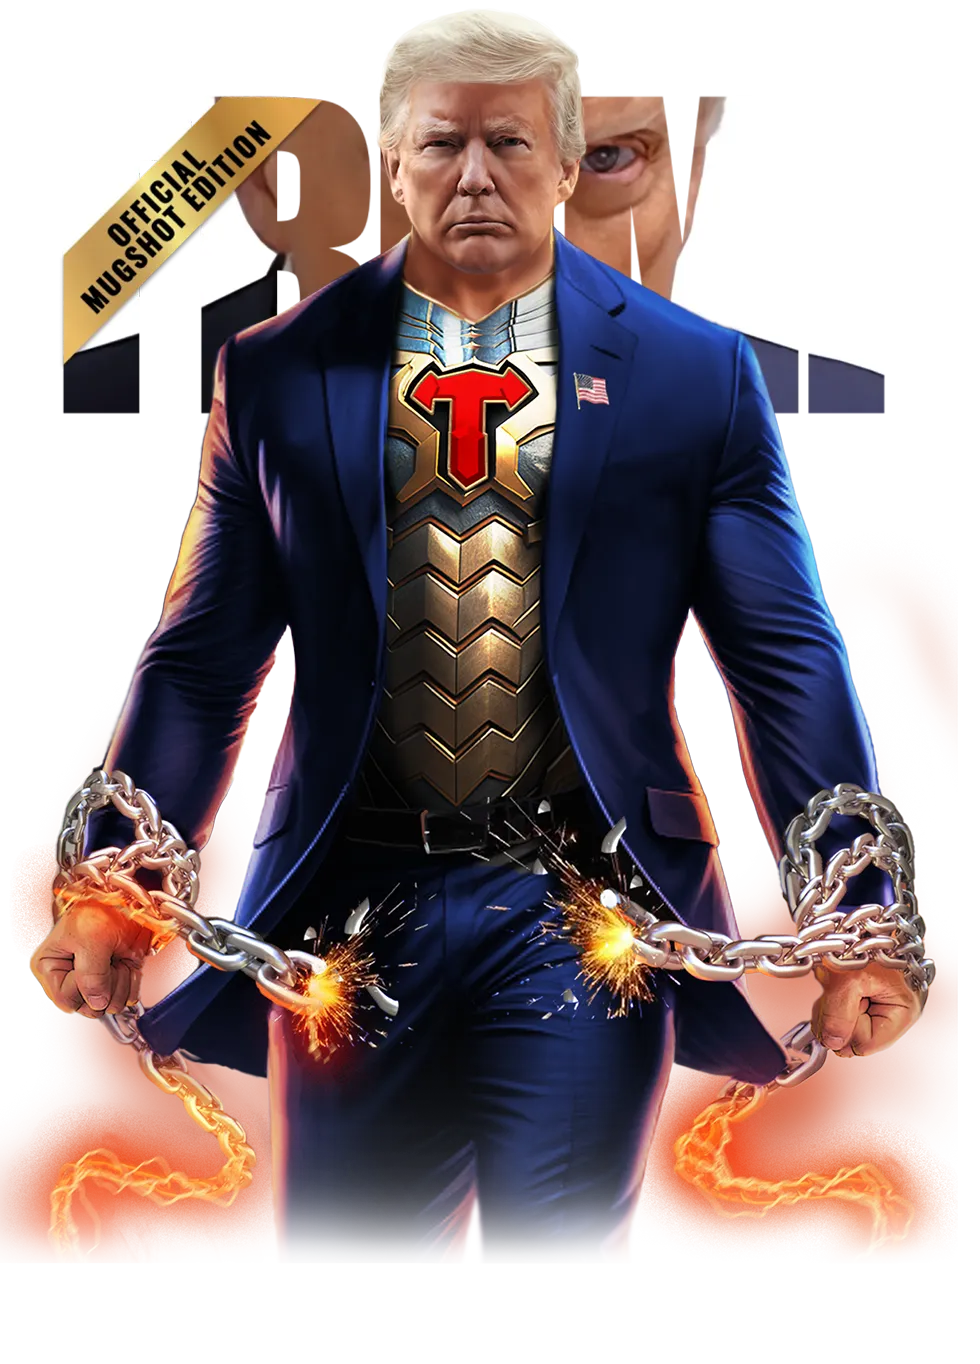 Donald Trump Unchained